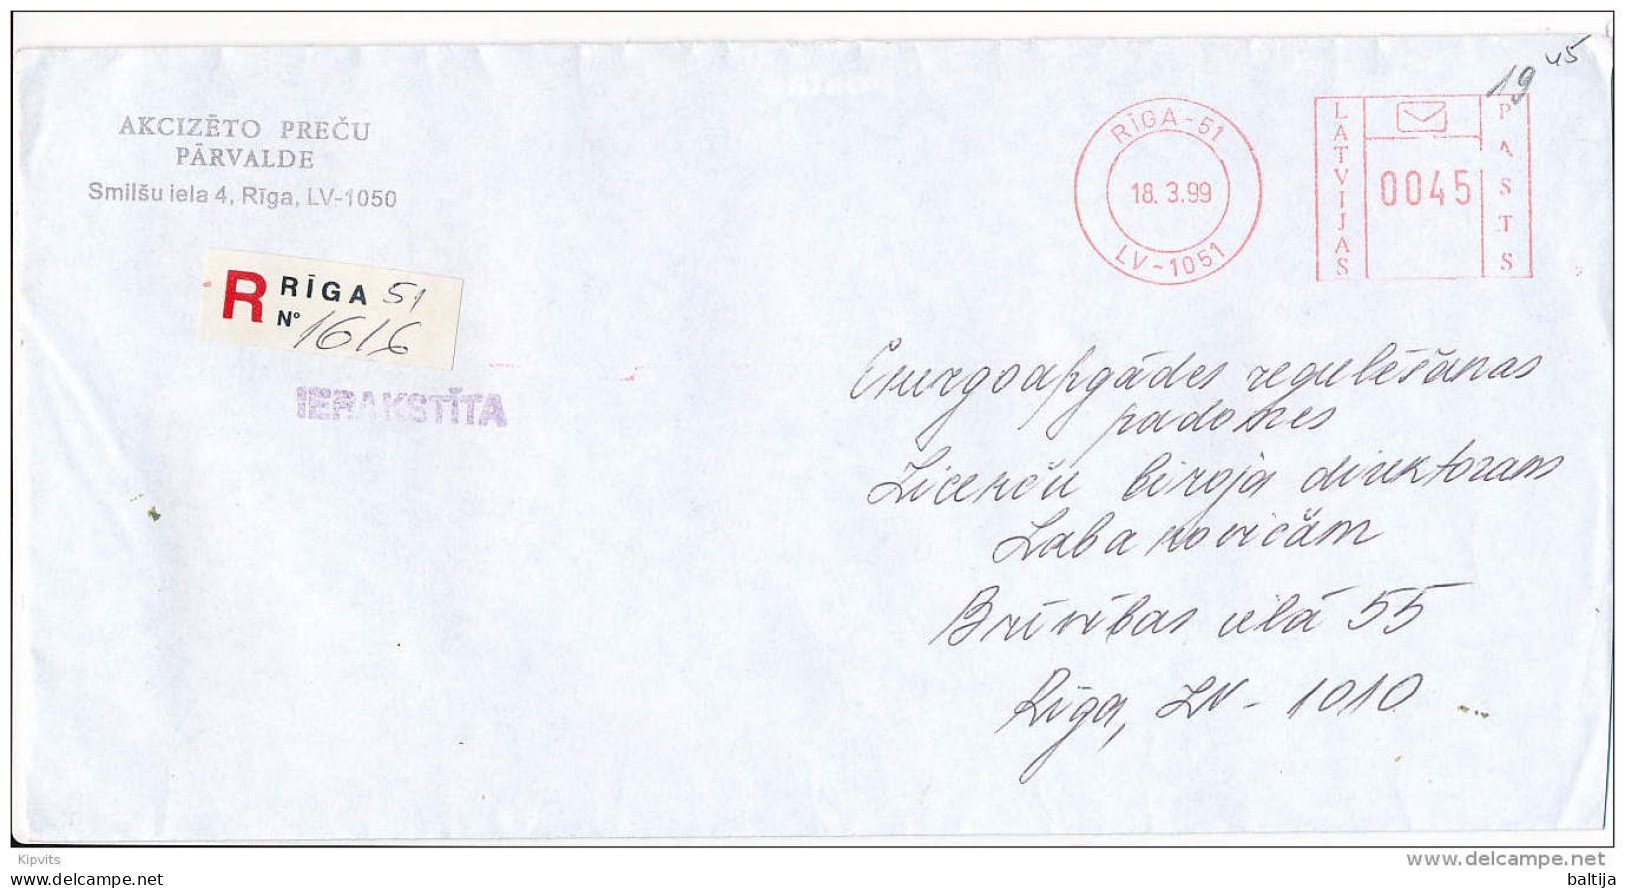 Registered Post Office Meter Cover - 18 March 1999 Riga-51 - Latvia